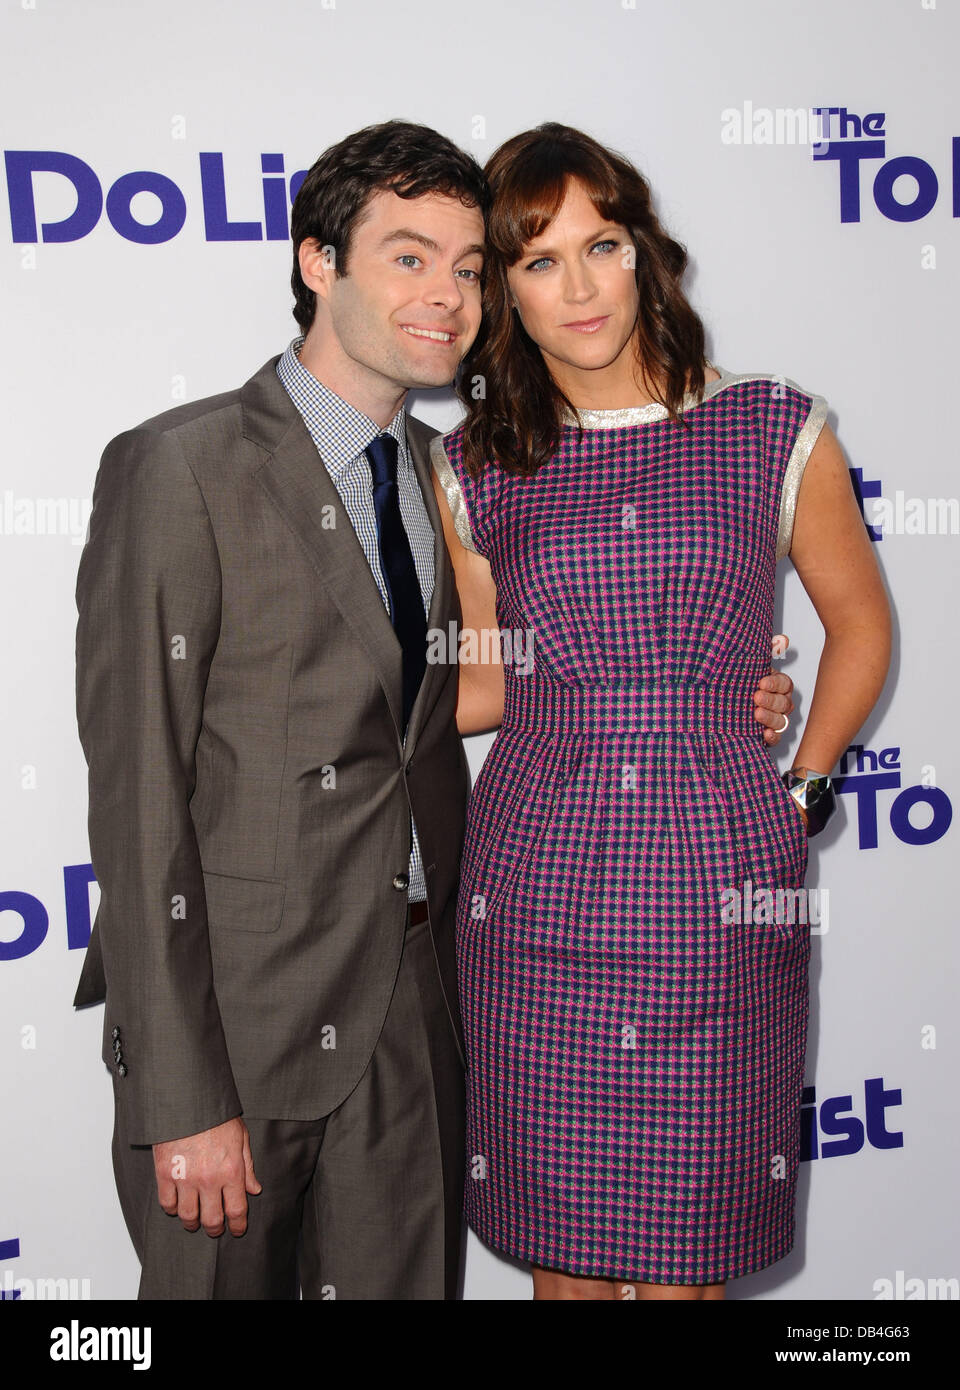 Los Angeles, California, USA. 23rd July, 2013. Bill Hader, Maggie Carey attending the Los Angeles Premiere of ''The To Do List'' held at the Regency Bruin Theater in Westwood, California on July 23 2013. 2013. Credit:  D. Long/Globe Photos/ZUMAPRESS.com/Alamy Live News Stock Photo